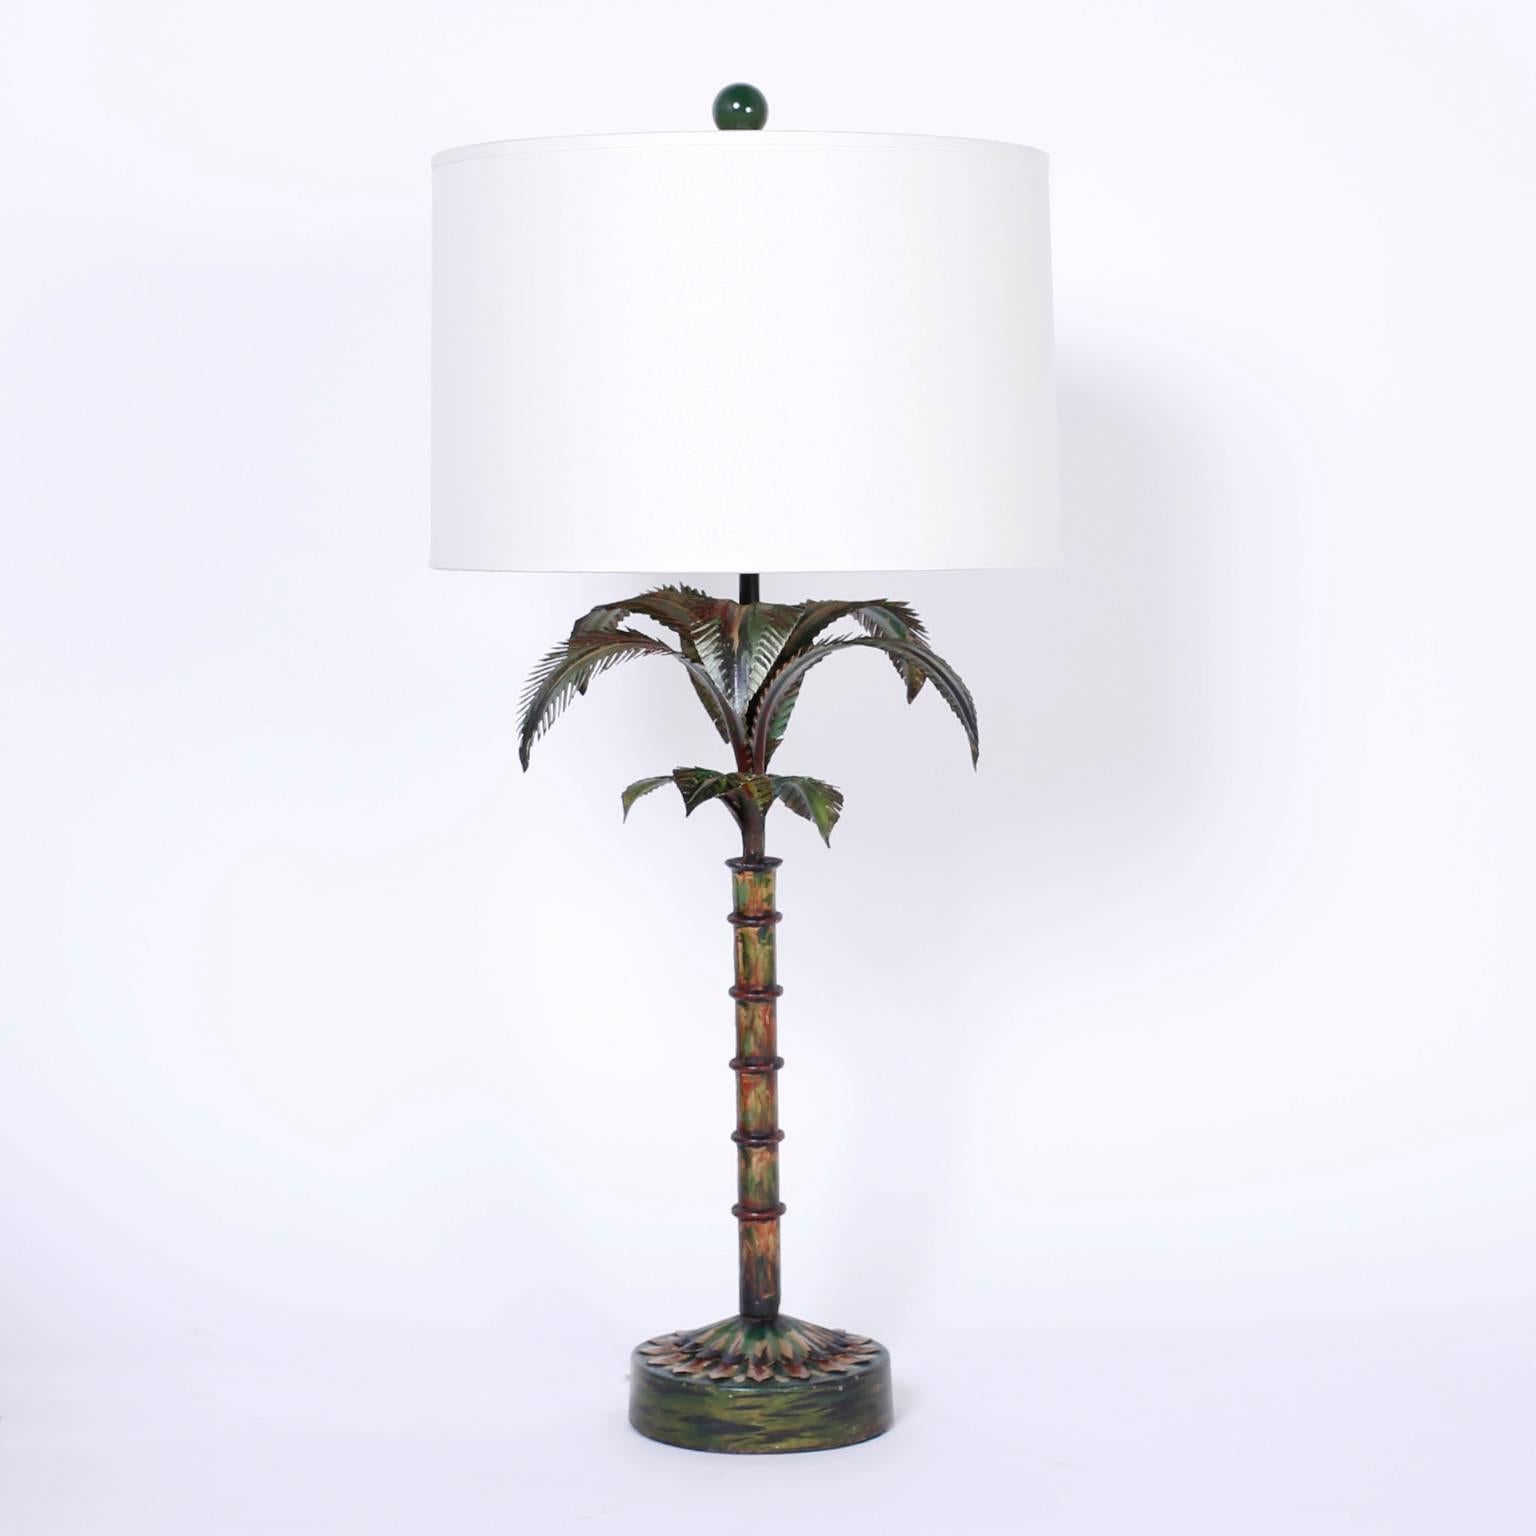 Stand out pair of painted metal or tole palm tree table lamps with a stylized form and a modern rustic faux finish. Newly wired.